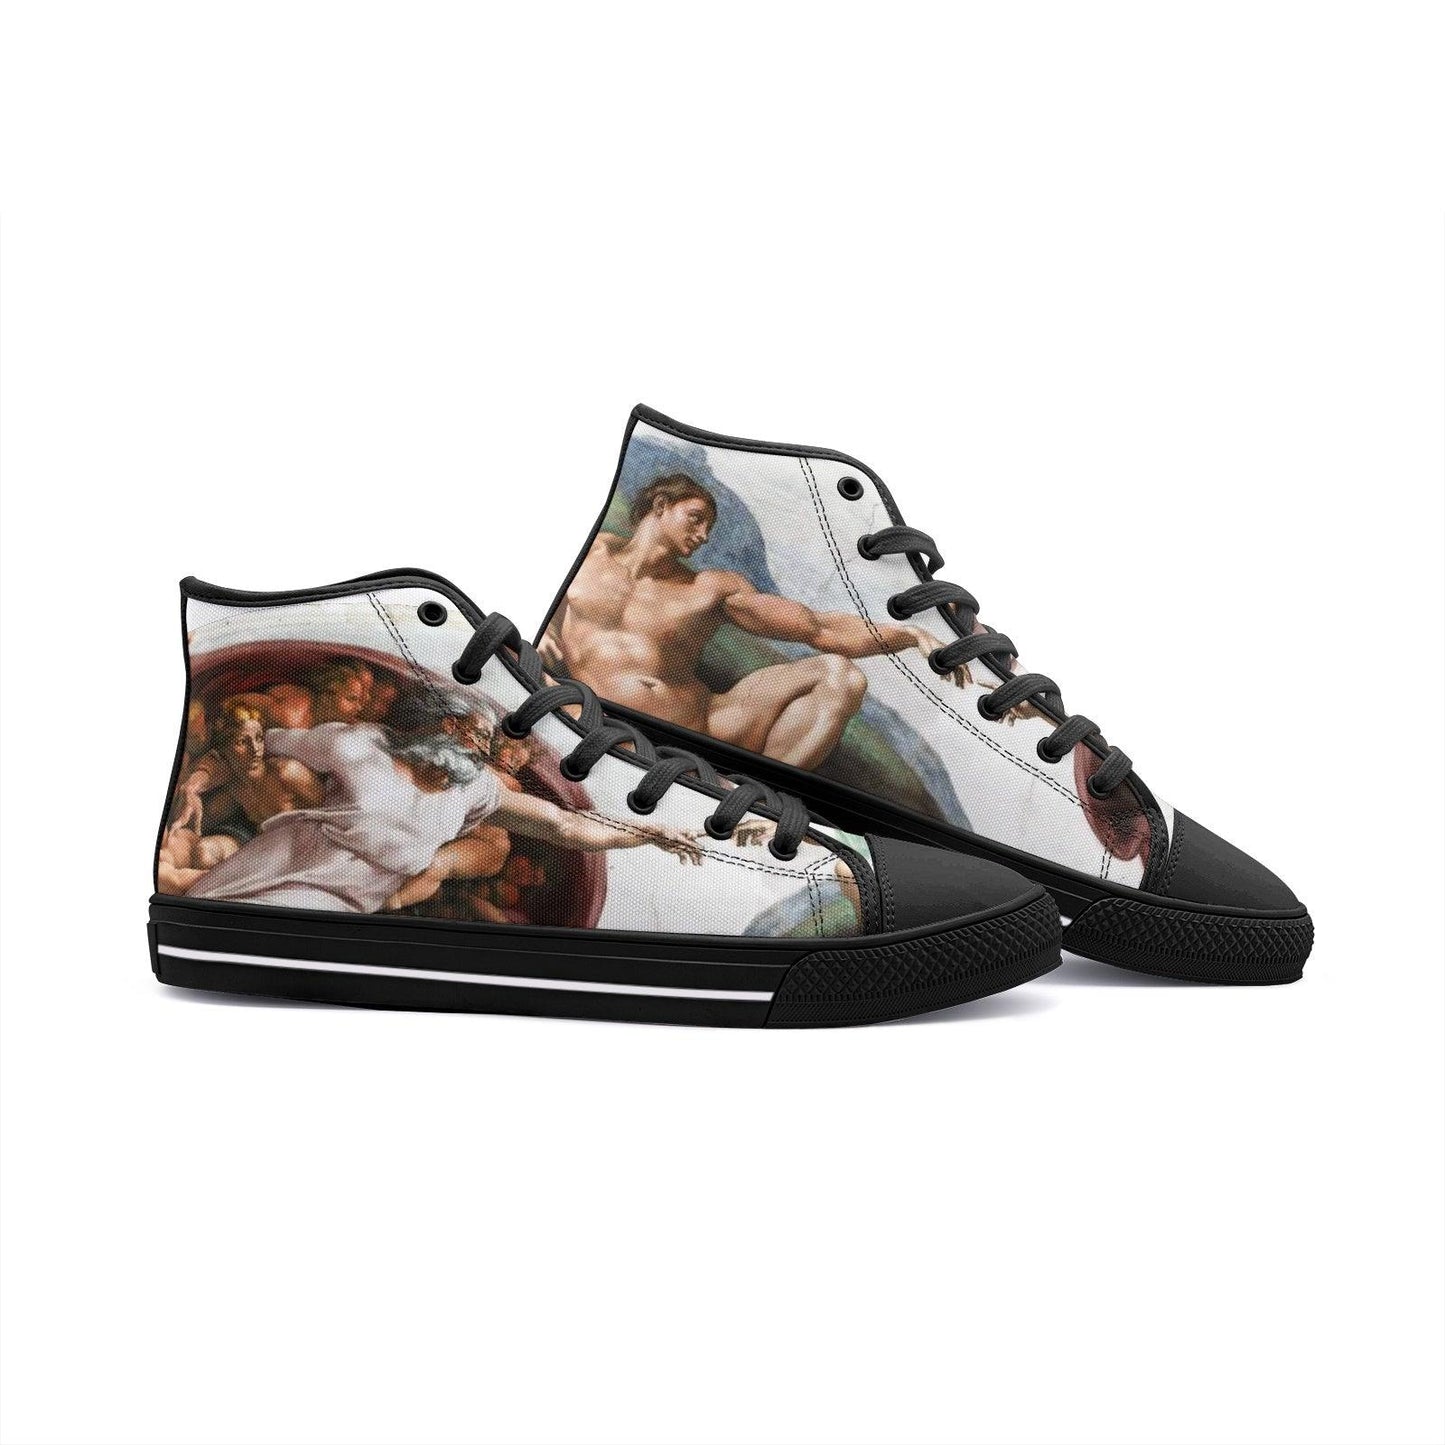 Creation of Man - Freaky Shoes®